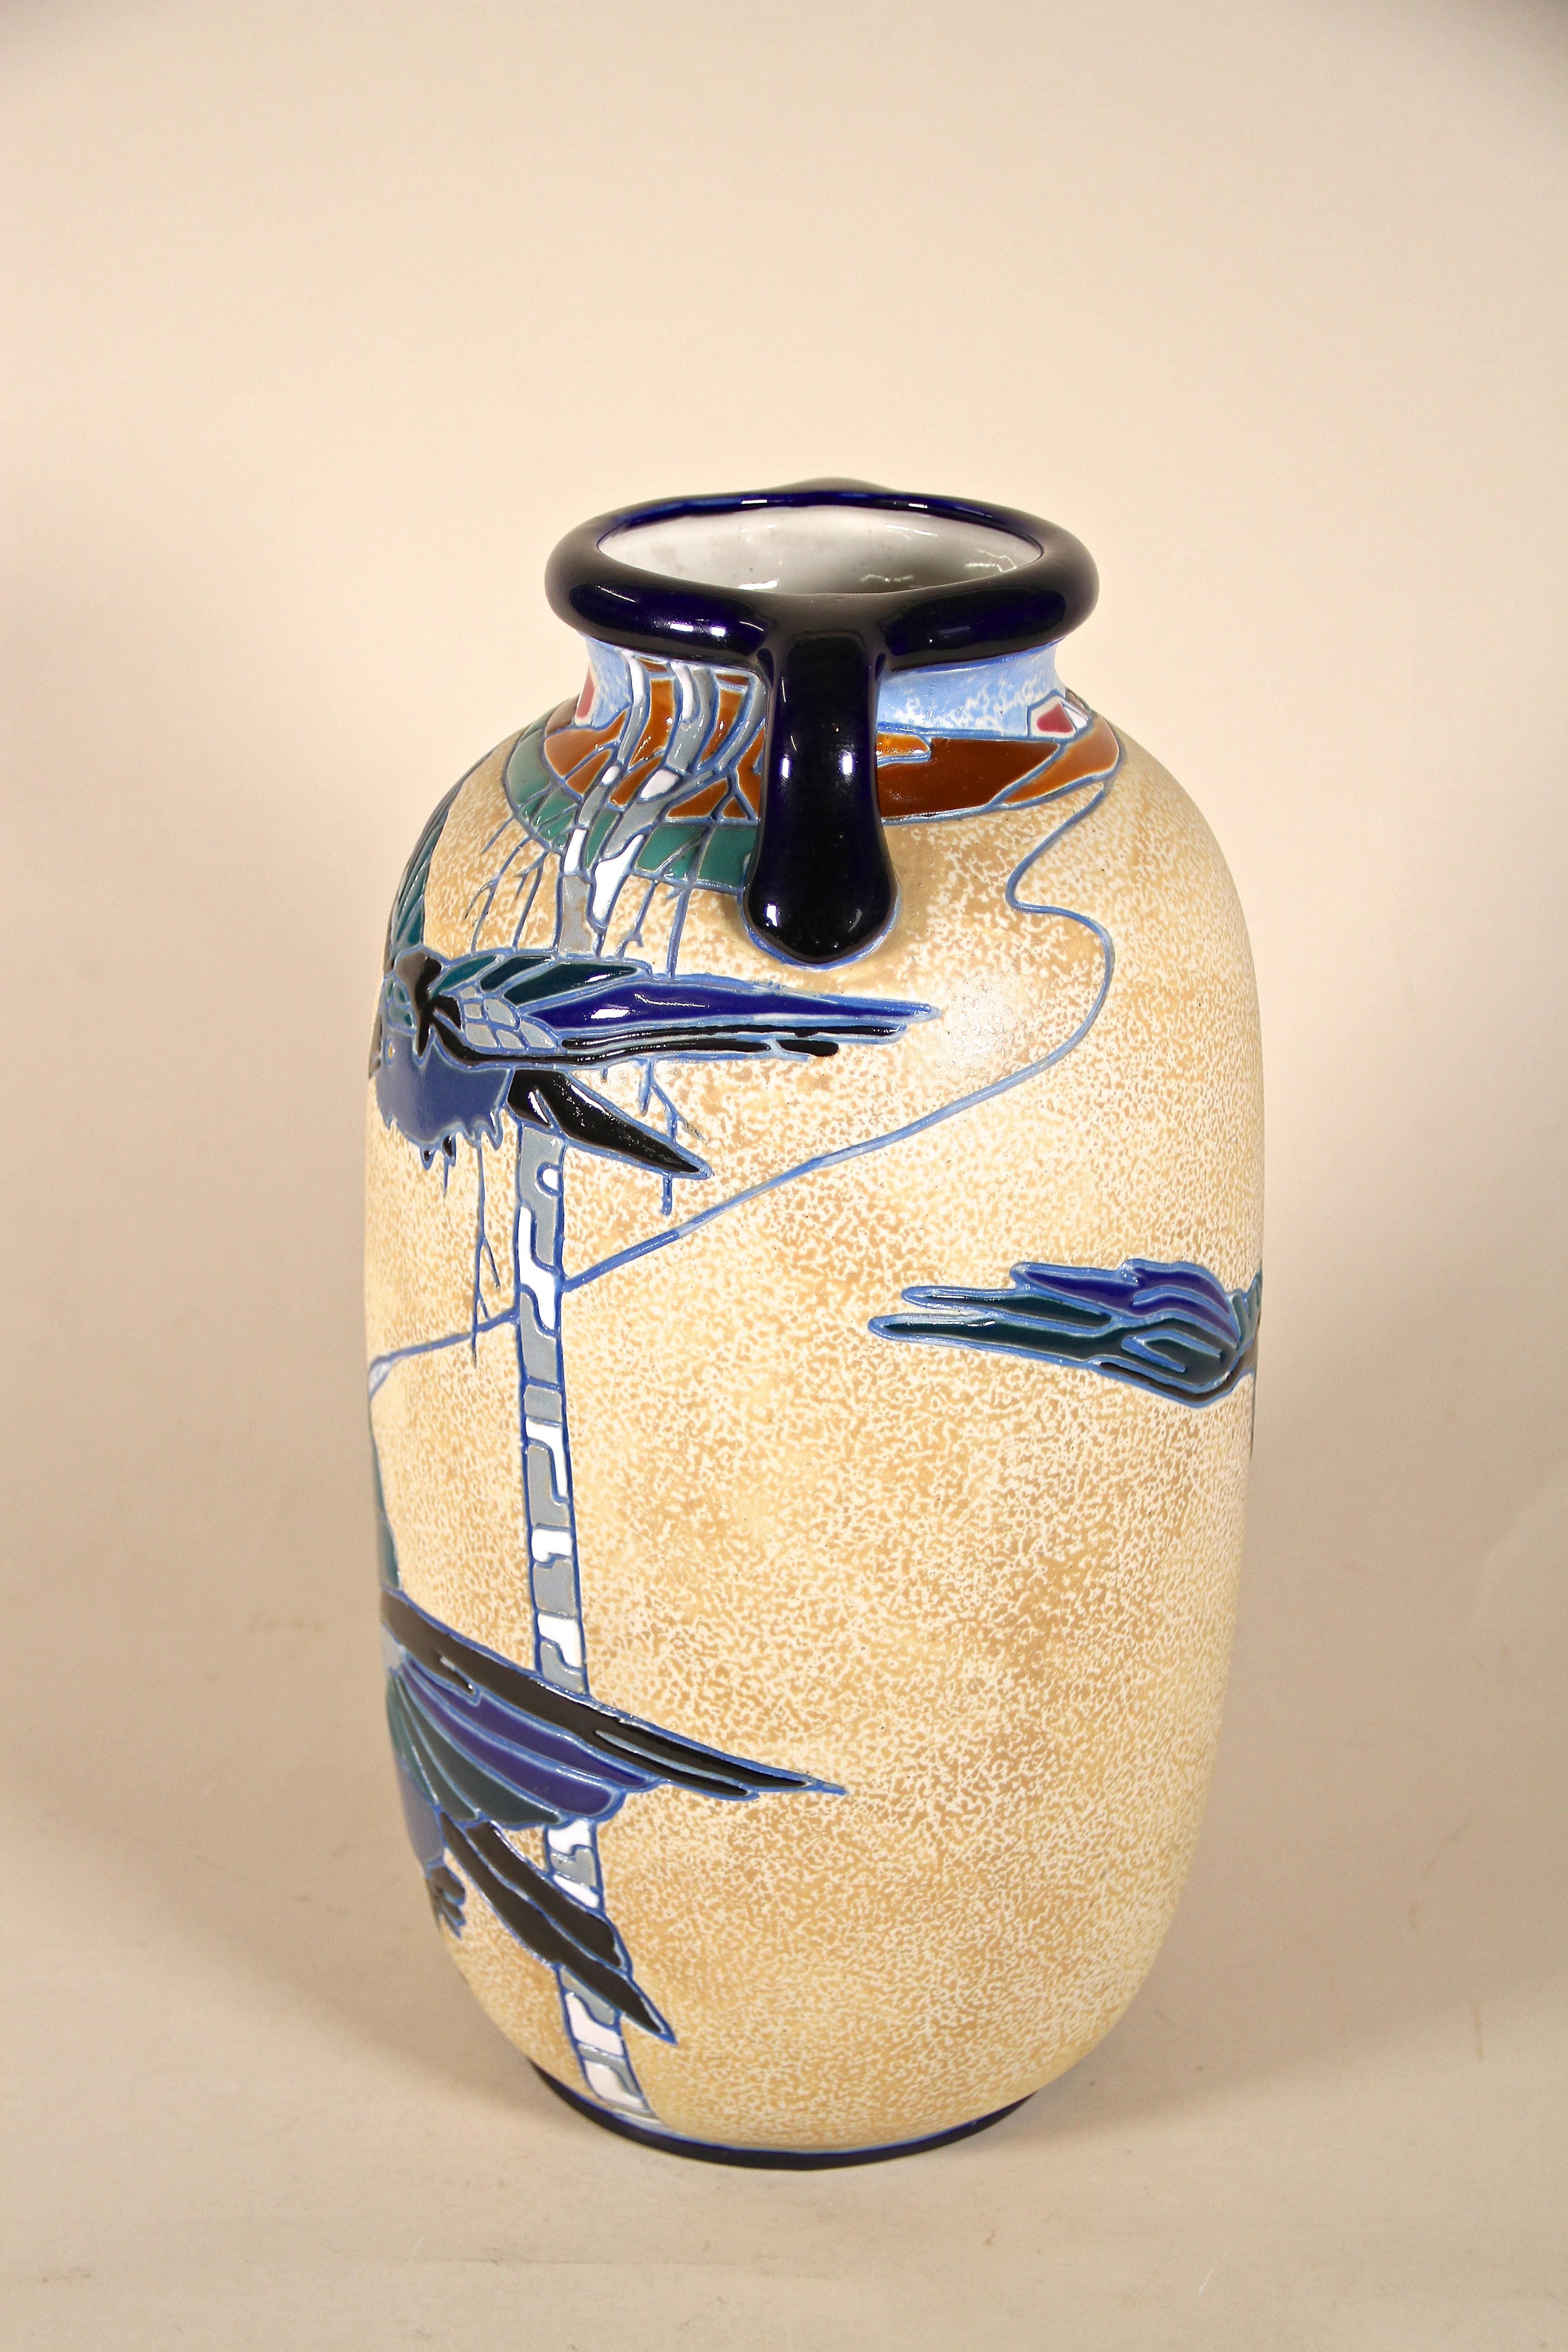 Painted Art Deco Majolica Vase With Enamel Paintings by Amphora, CZ, circa 1920